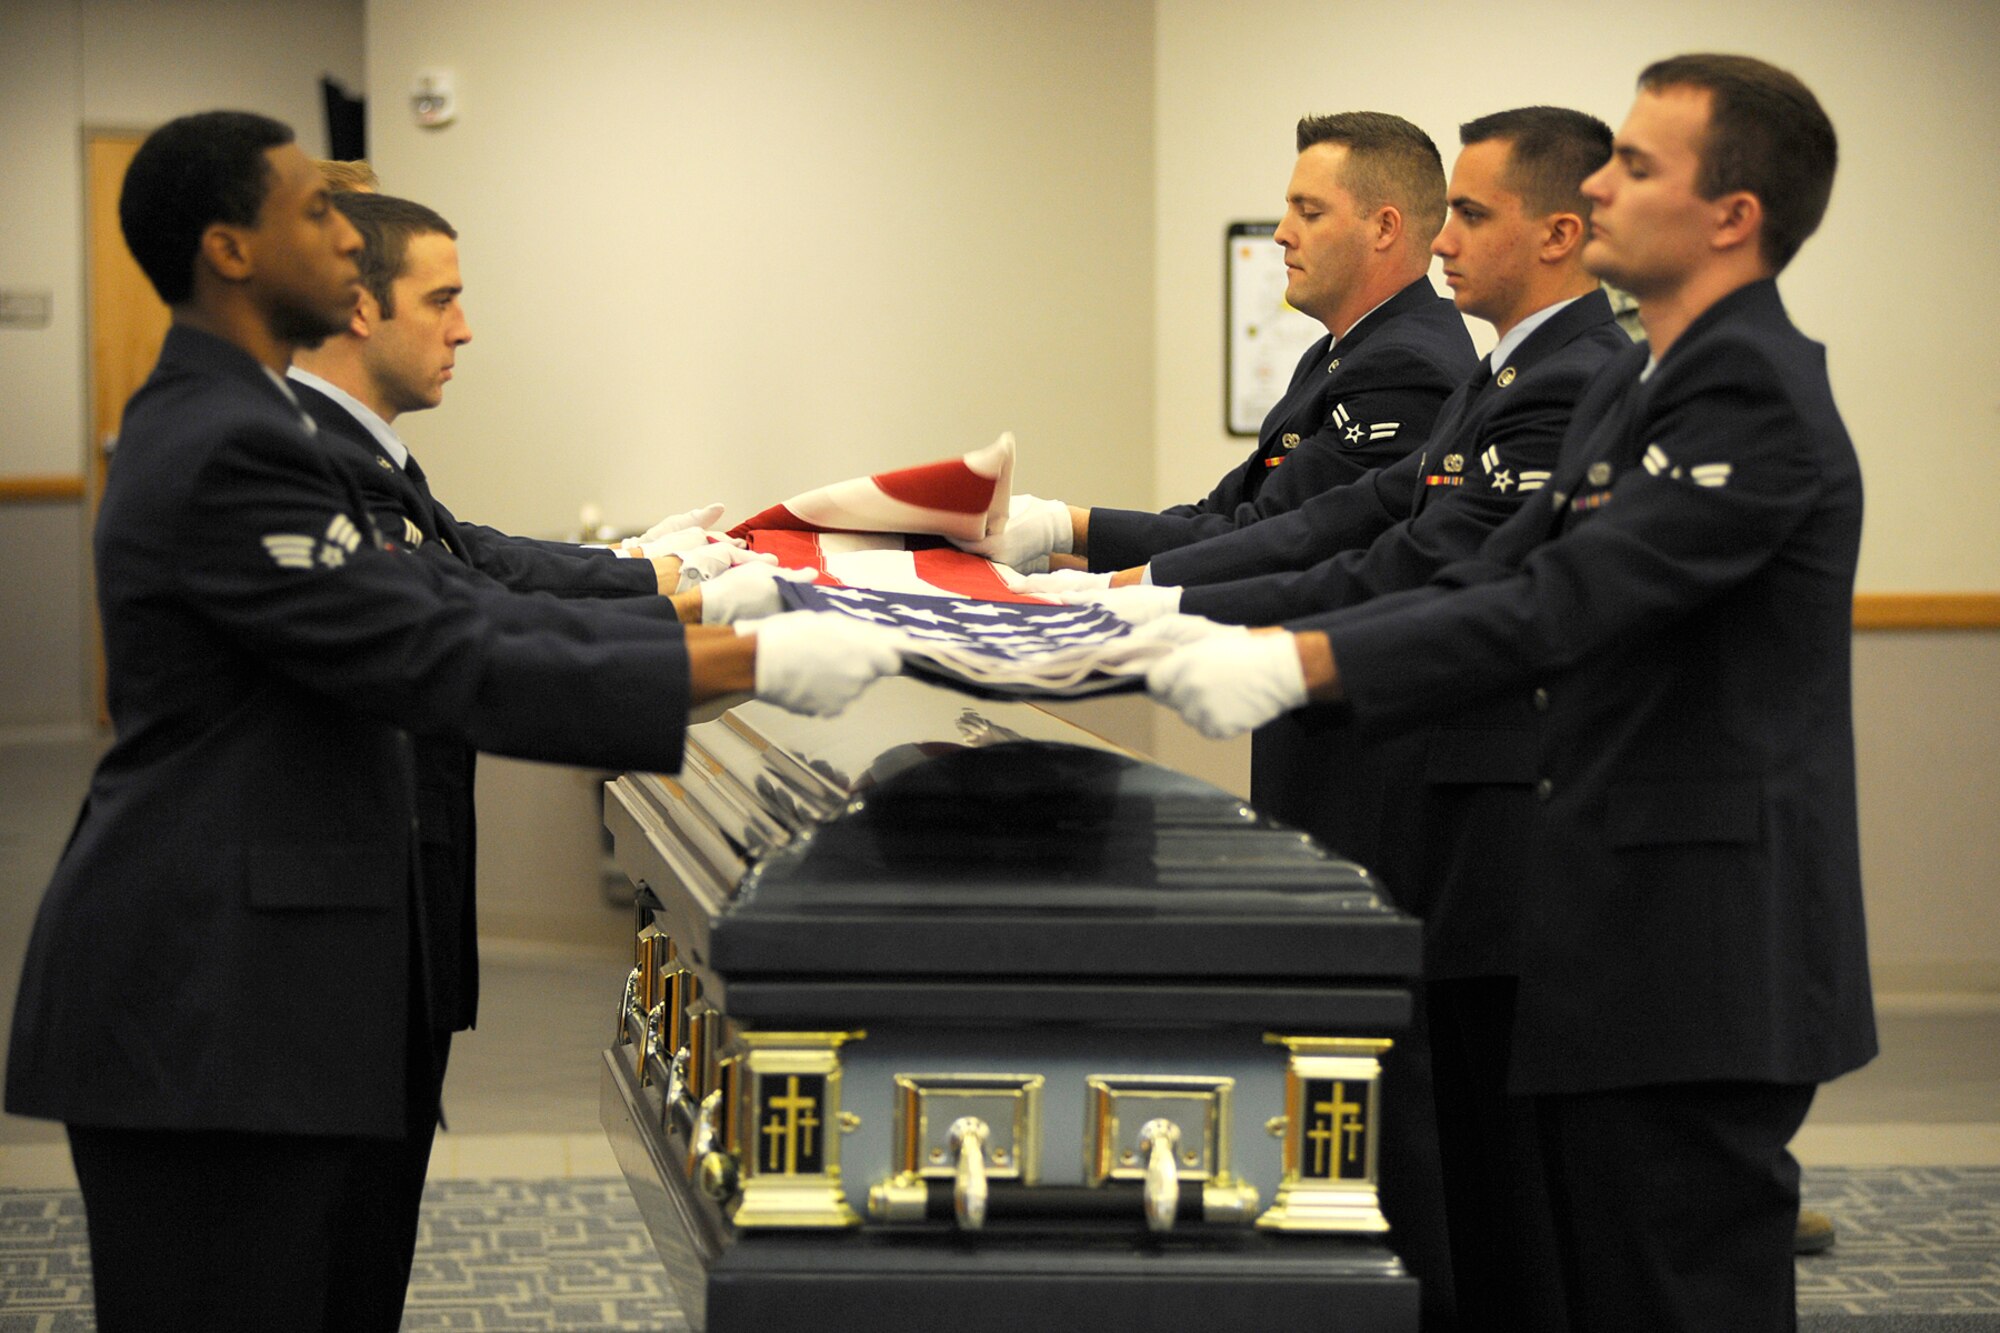 Trainees and members of the 127th Wing Honor Guard fold the U.S. Flag over a casket during a training session at Selfridge Air National Guard Base, Mich., Feb. 10, 2012. In addition to the empty casket, volunteers acted as “grieving family members” to assist honor guard trainees learn the appropriate ceremonial honors to be rendered at a veteran’s funeral. The honor guard held a training session to qualify six new Airmen to serve as members of the unit. (U.S. Air Force photo by John S. Swanson)